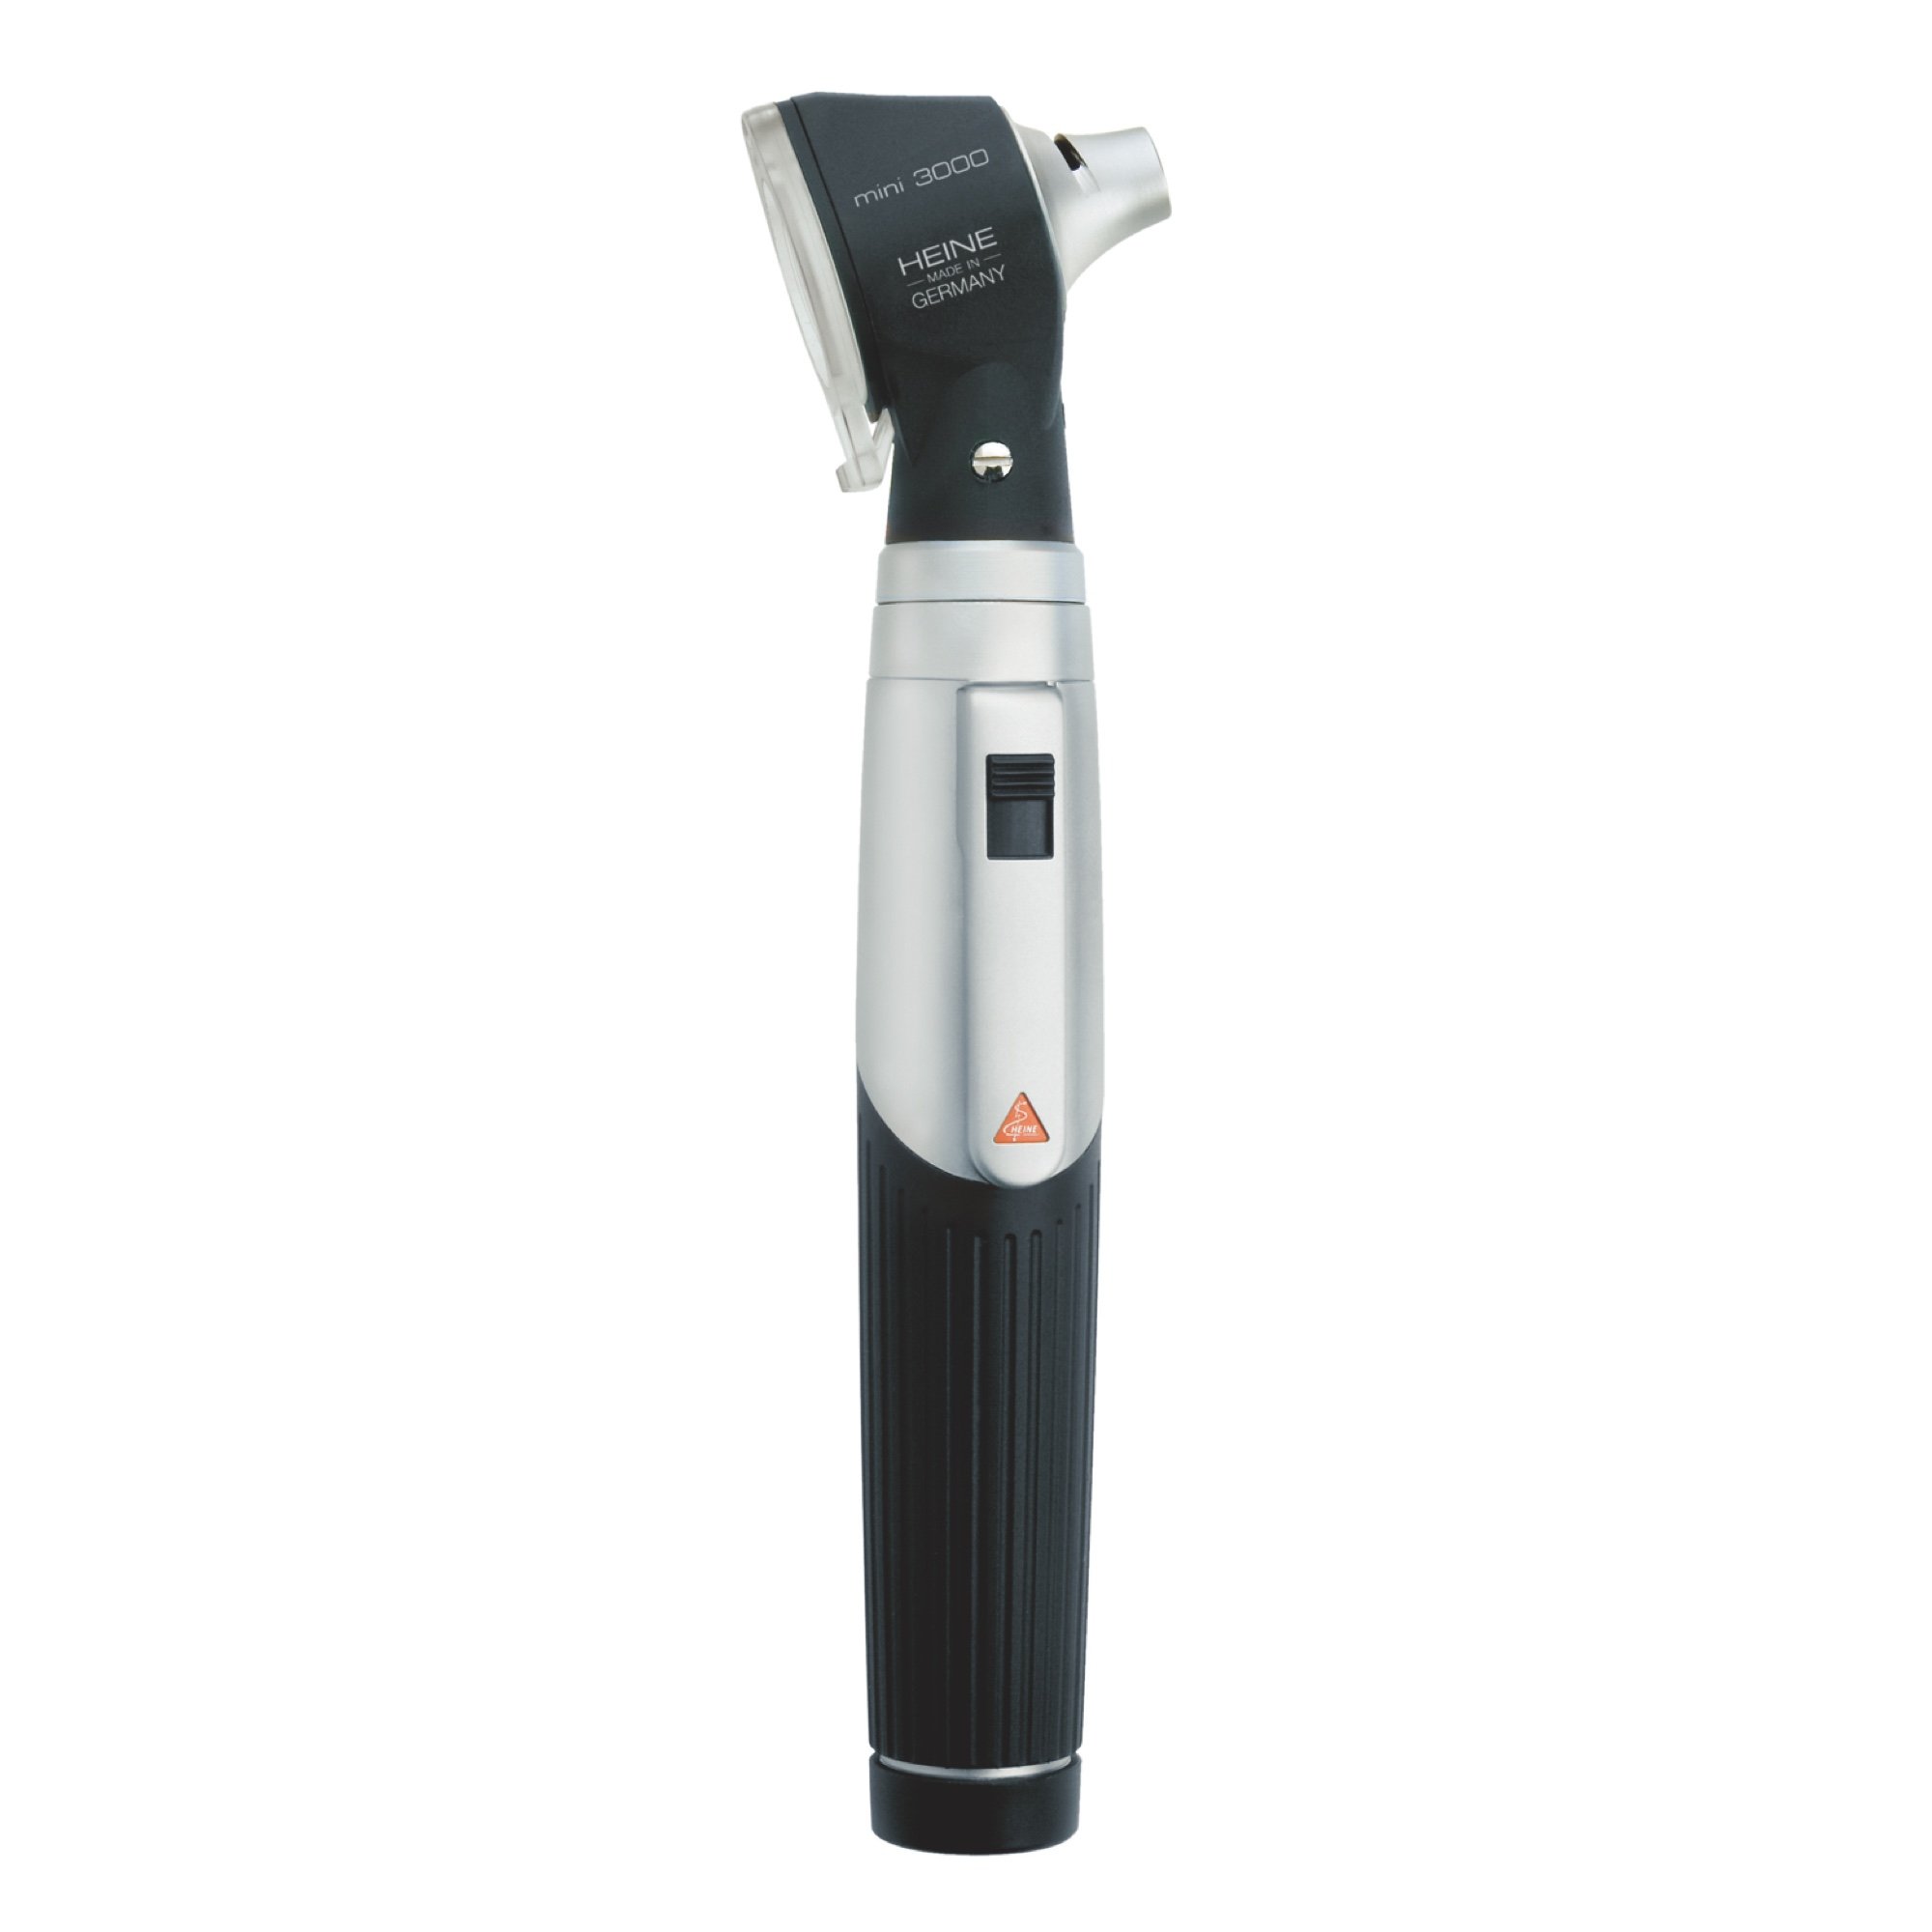 HEINE mini3000 Otoscope Set with battery handle with Disposable tips